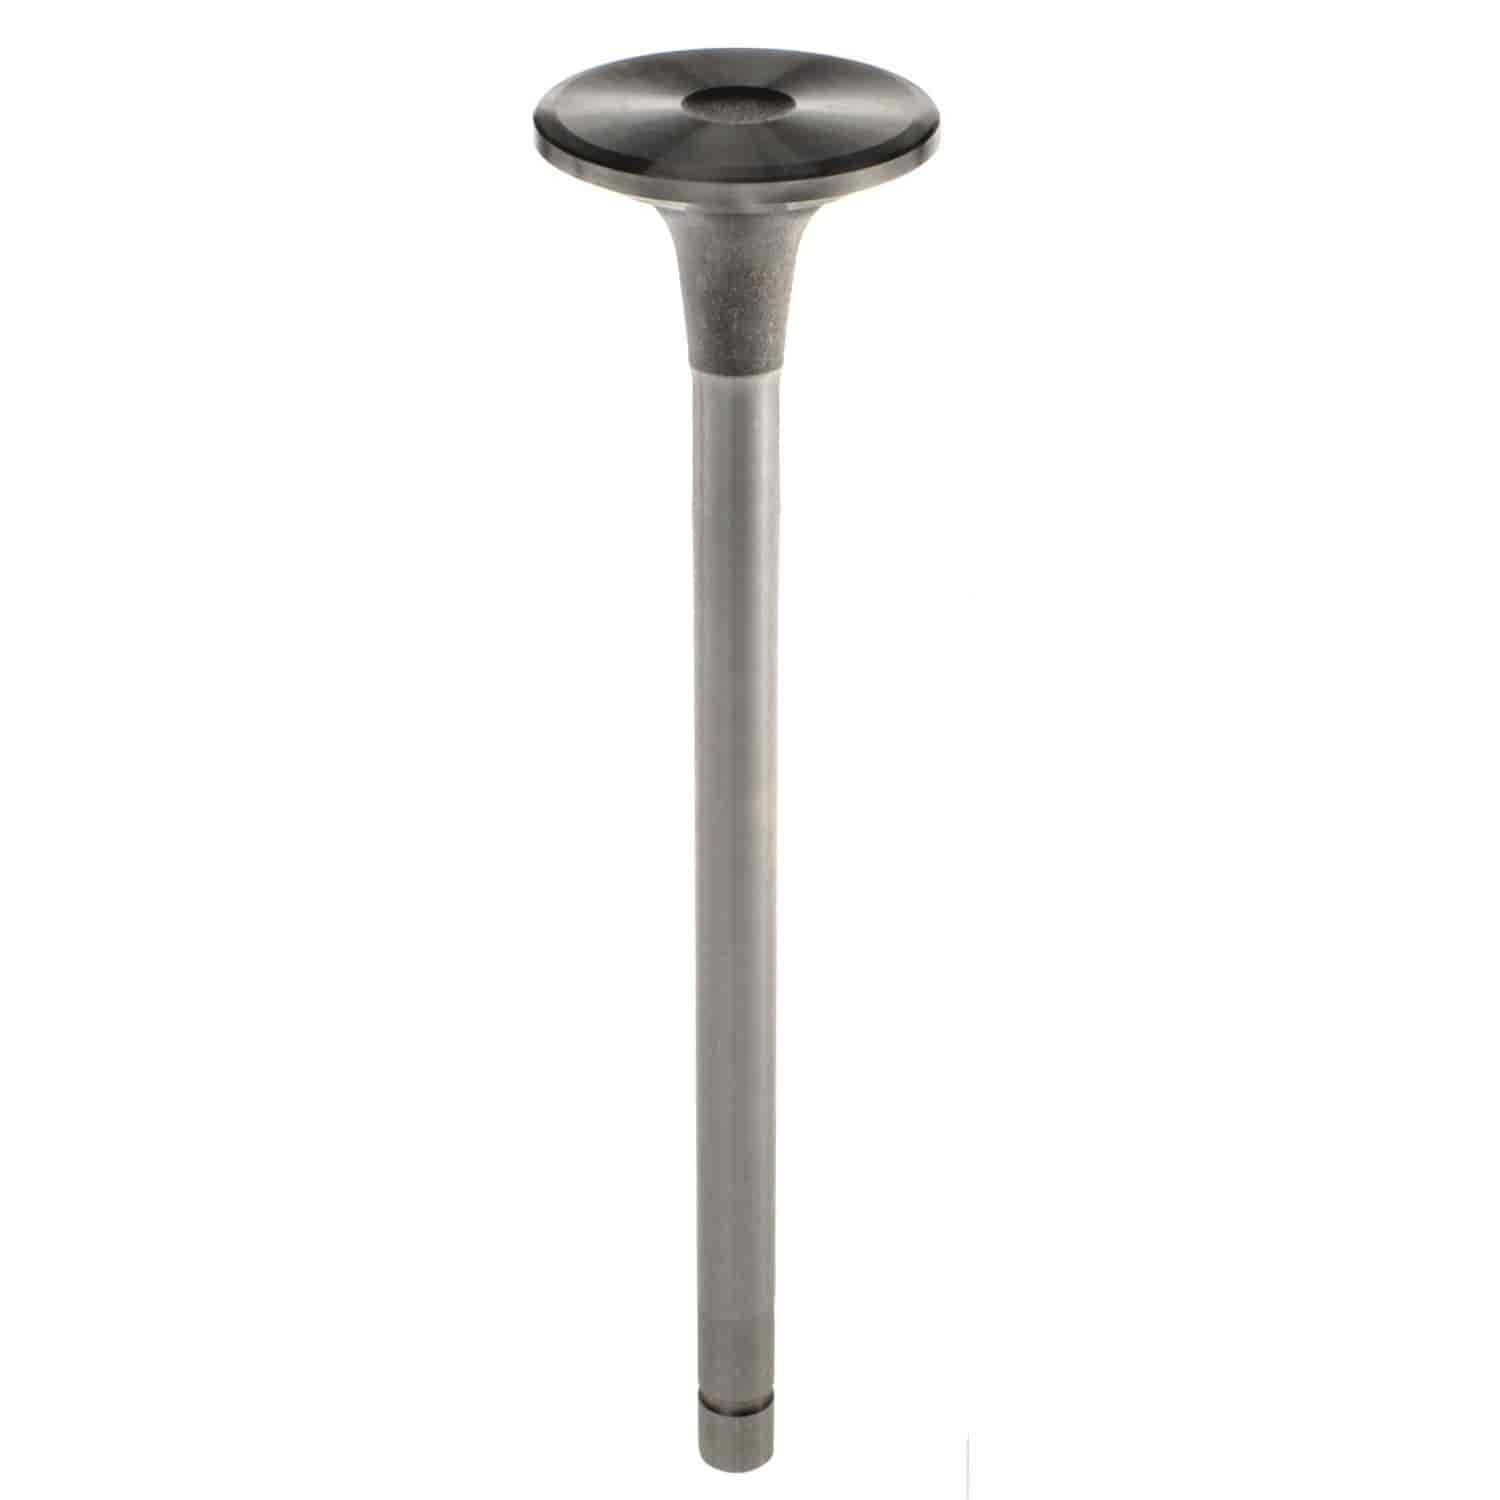 Intake Valve for Cummins L10 Up to and including 1990 @ I